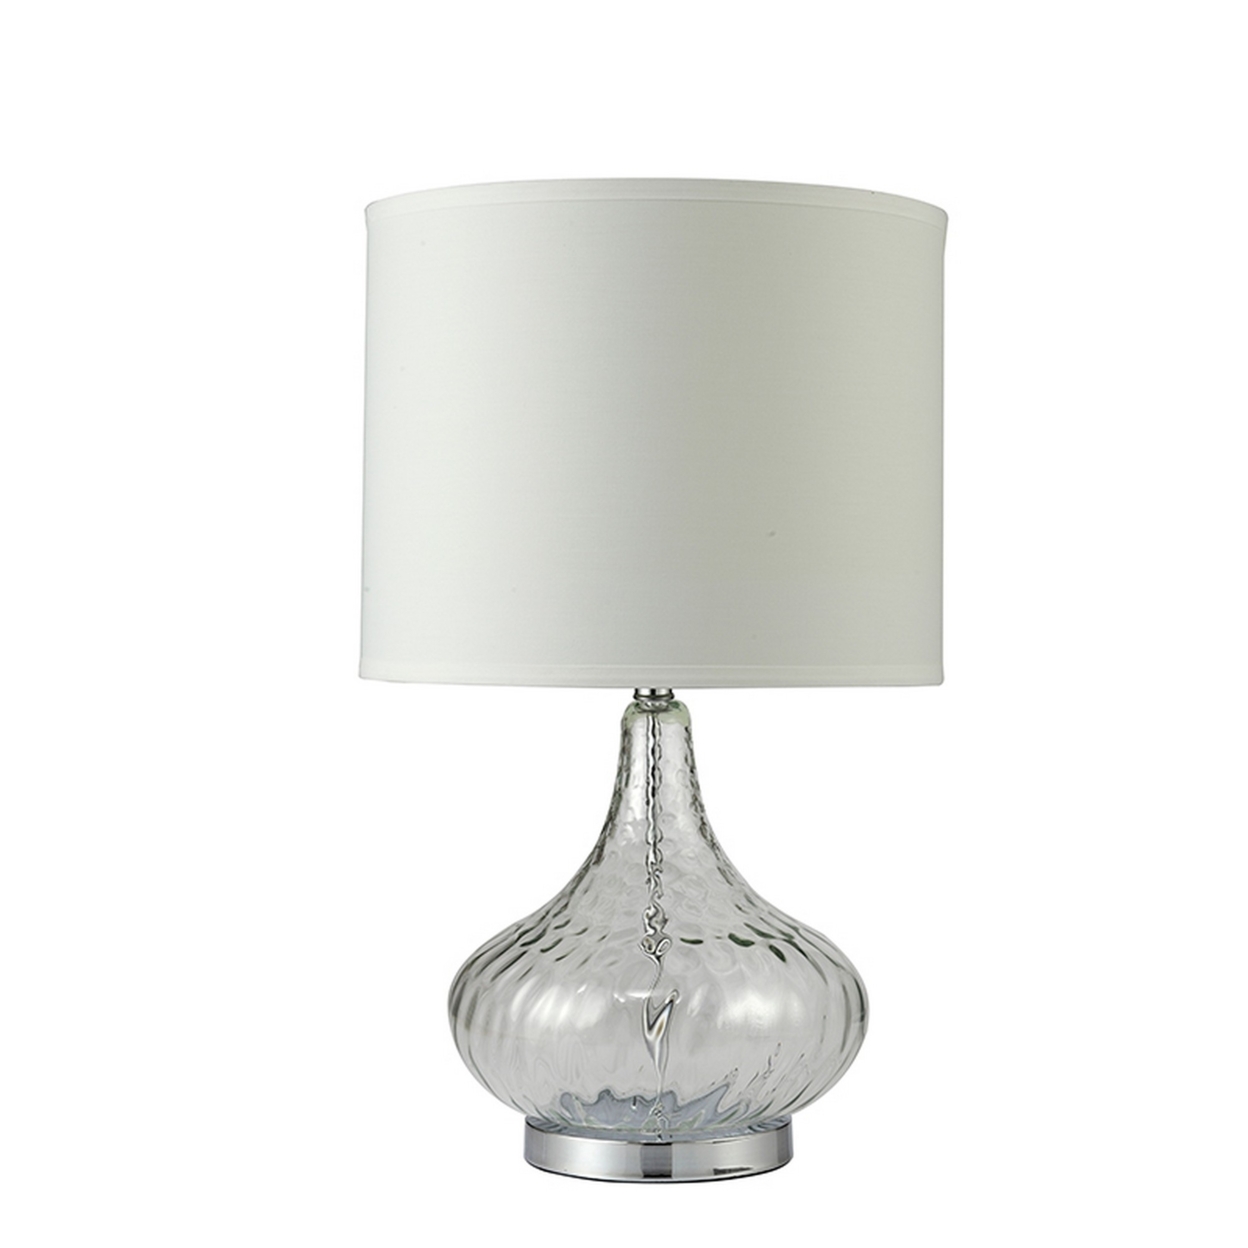 Table Lamp with Pot Bellied Glass Body, Clear and White- Saltoro Sherpi